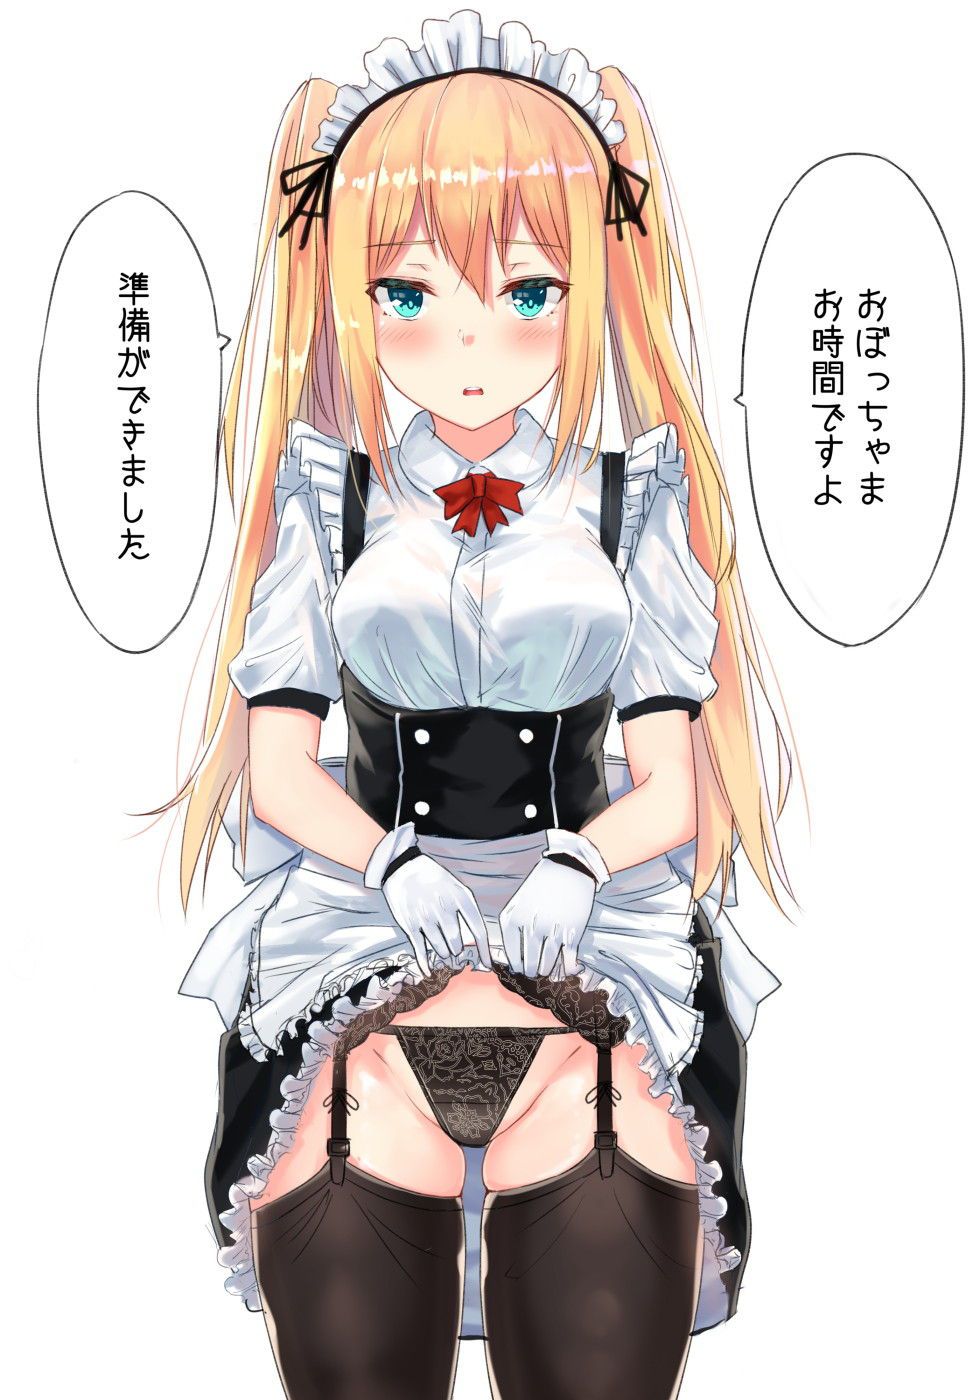 From "Good Morning" to "Goodnight", the maid who supports sexual activity (LIFE) ♡ (24) 4